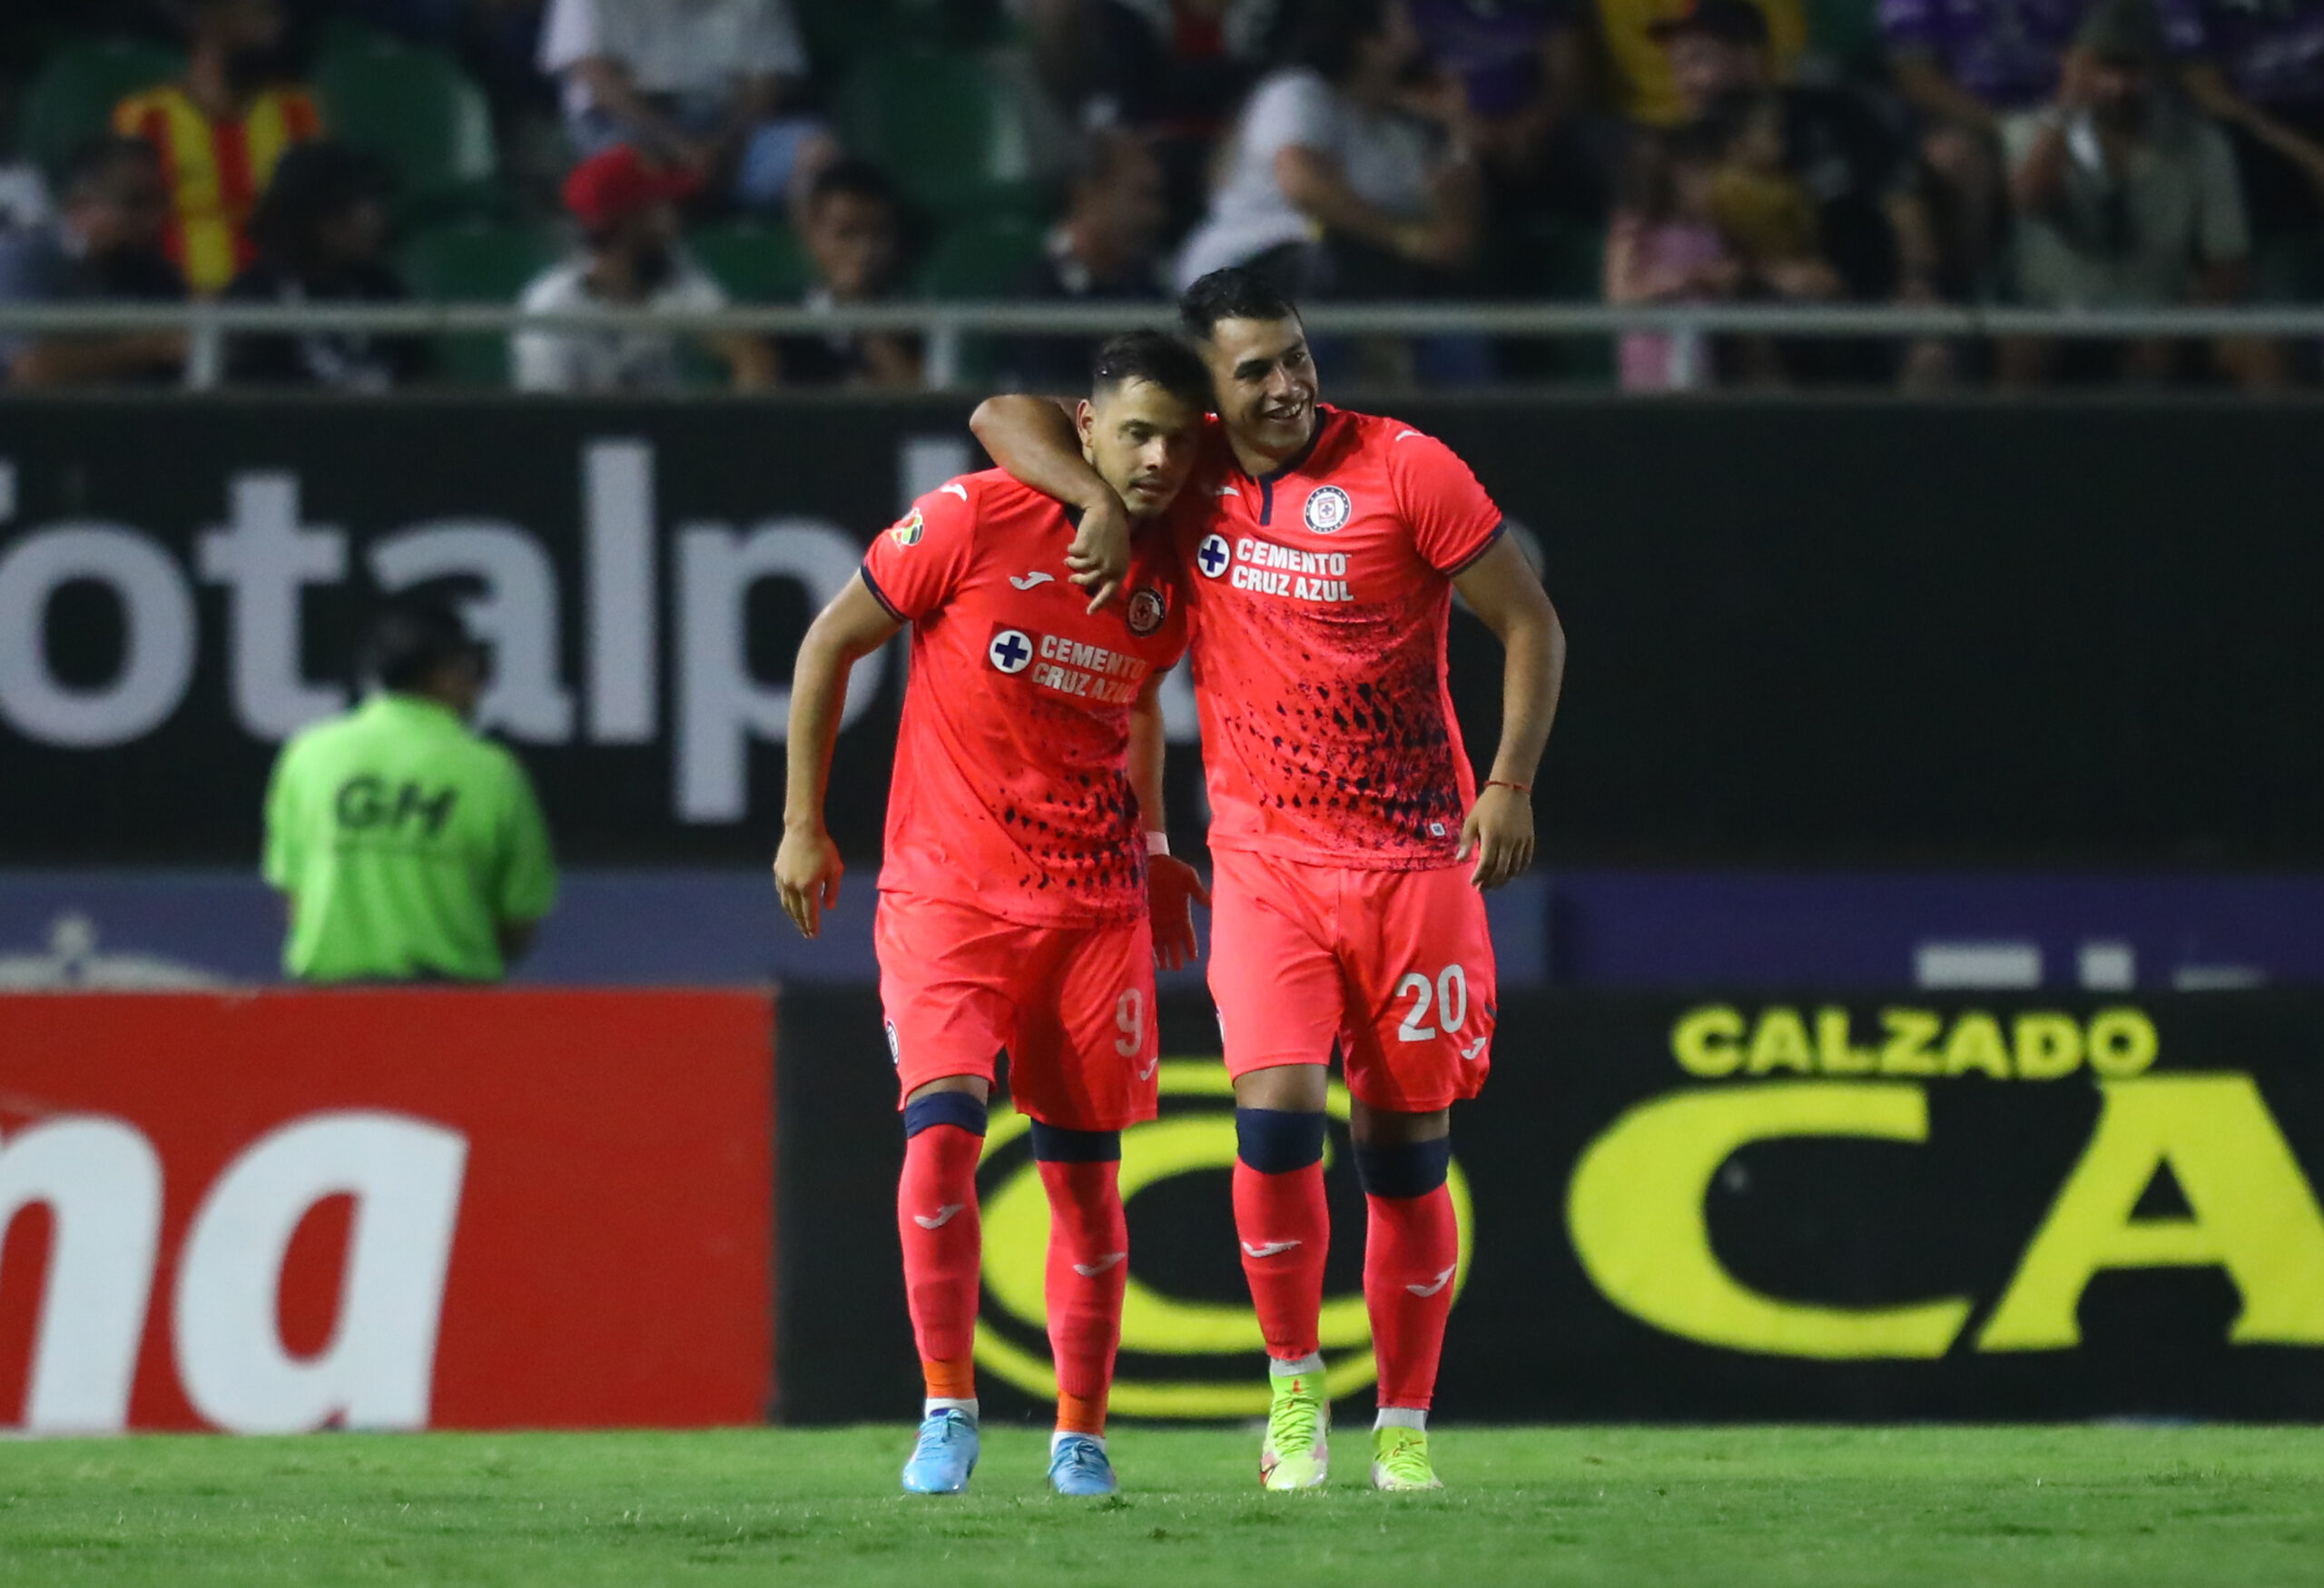 MAZATLAN, MEXICO - APRIL 08: Angel Romero and Ivan Morales of Cruz Azul celebrate the first goal of their team during the 13th round match between Mazatlan FC and Cruz Azul as part of the Torneo Grita Mexico C22 Liga MX at Kraken Stadium on April 08, 2022 in Mazatlan, Mexico. (Photo by Sergio Mejia/Getty Images)